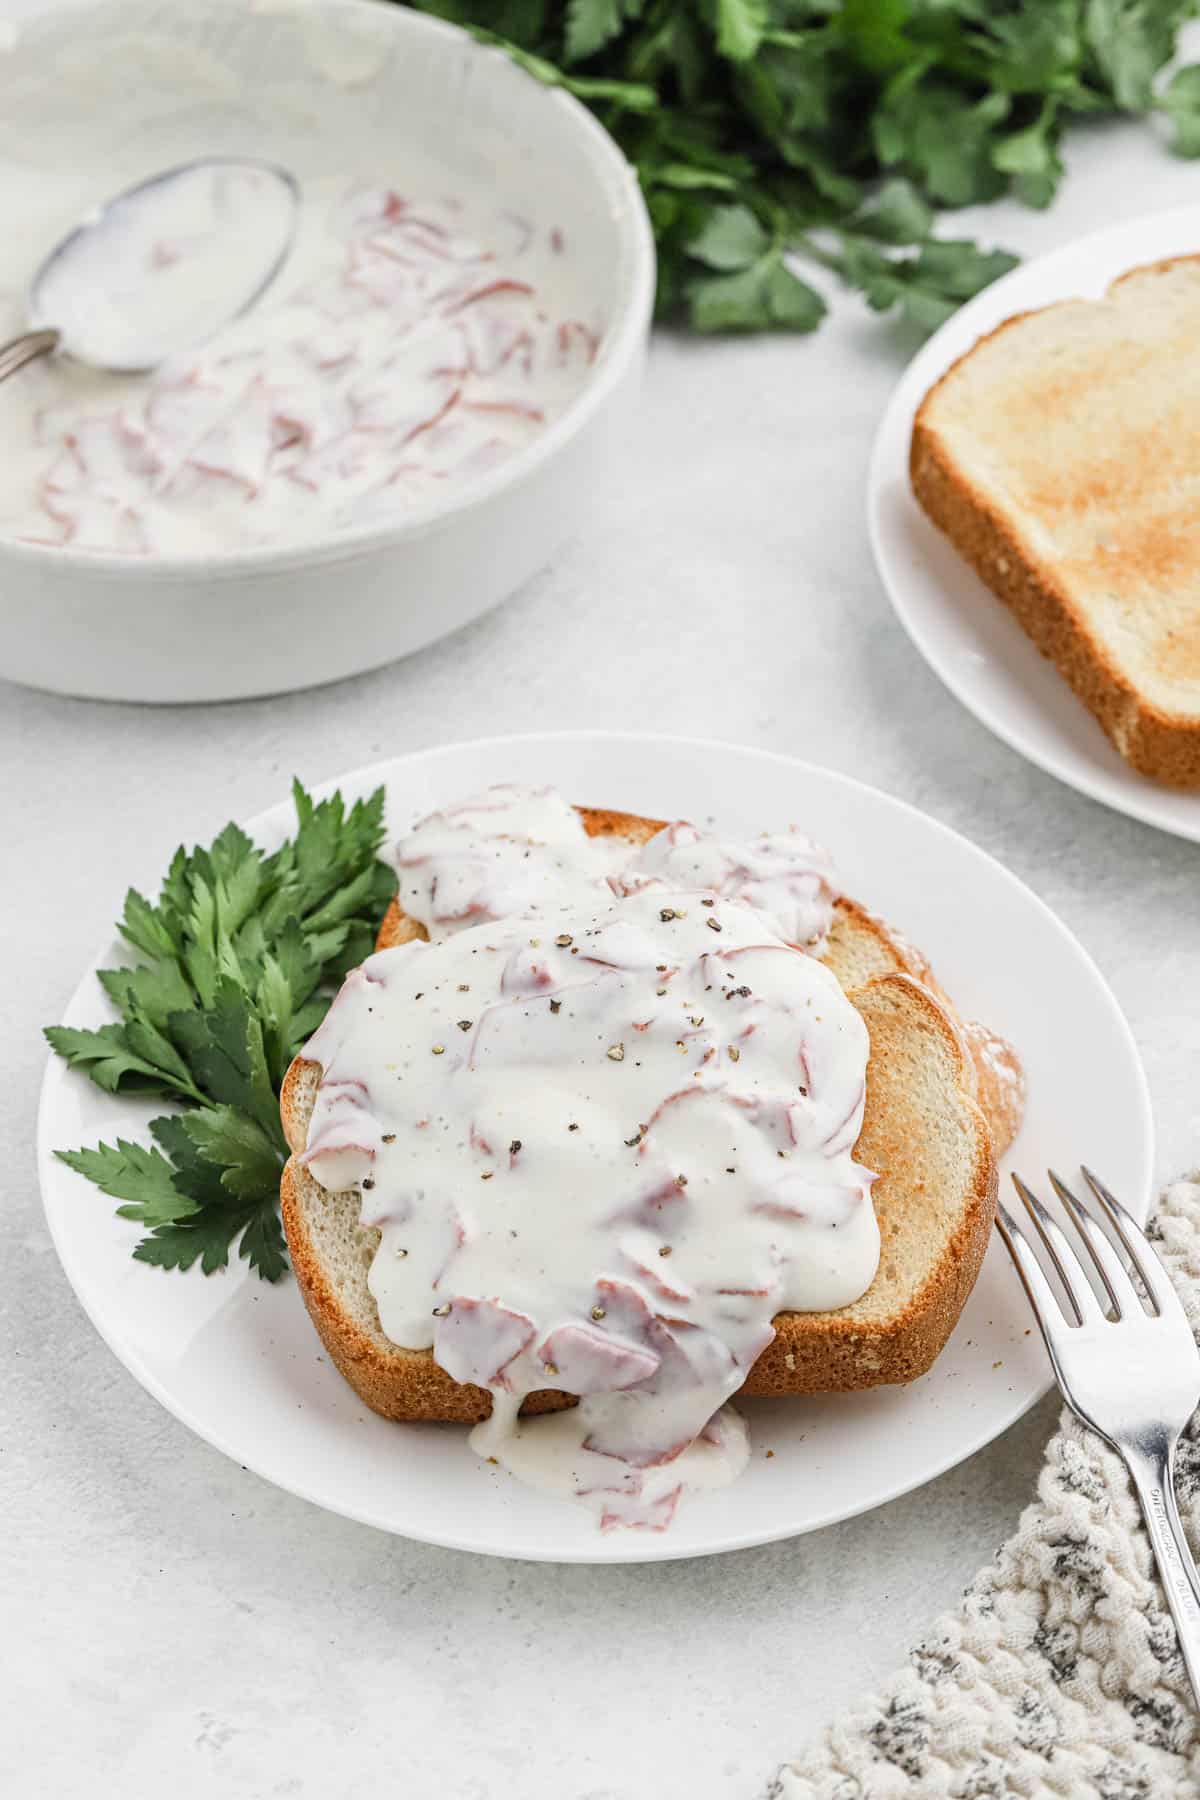 Chipped beef gravy on toast garnished with herbs on a white plate with a metal fork